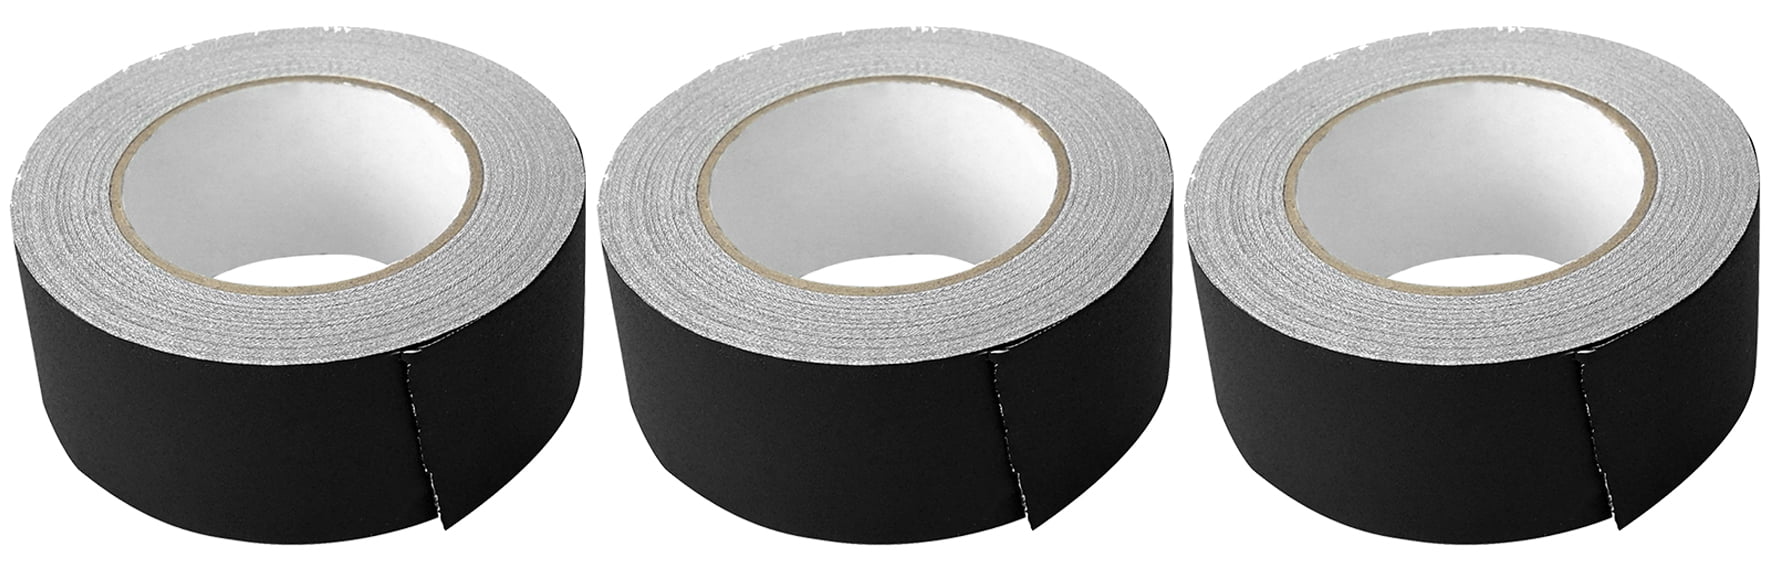 Rockville ROCK GAFF Black Gaffers Tape 2" x 100 Ft For Pro Audio/Stage Wire 